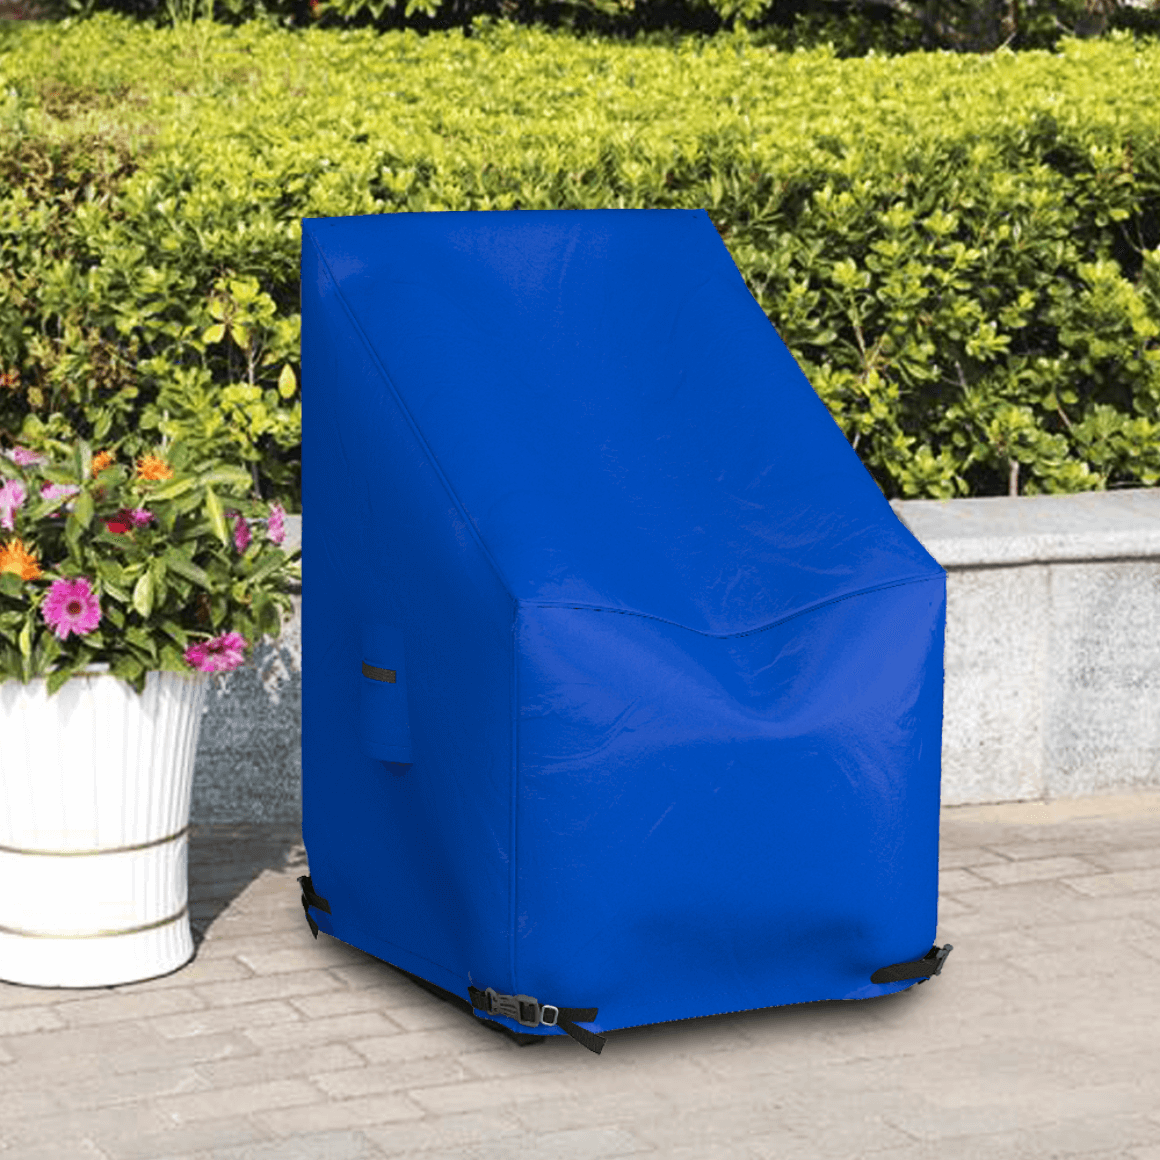 Invest in High Qualiy Outdoor Furniture Covers